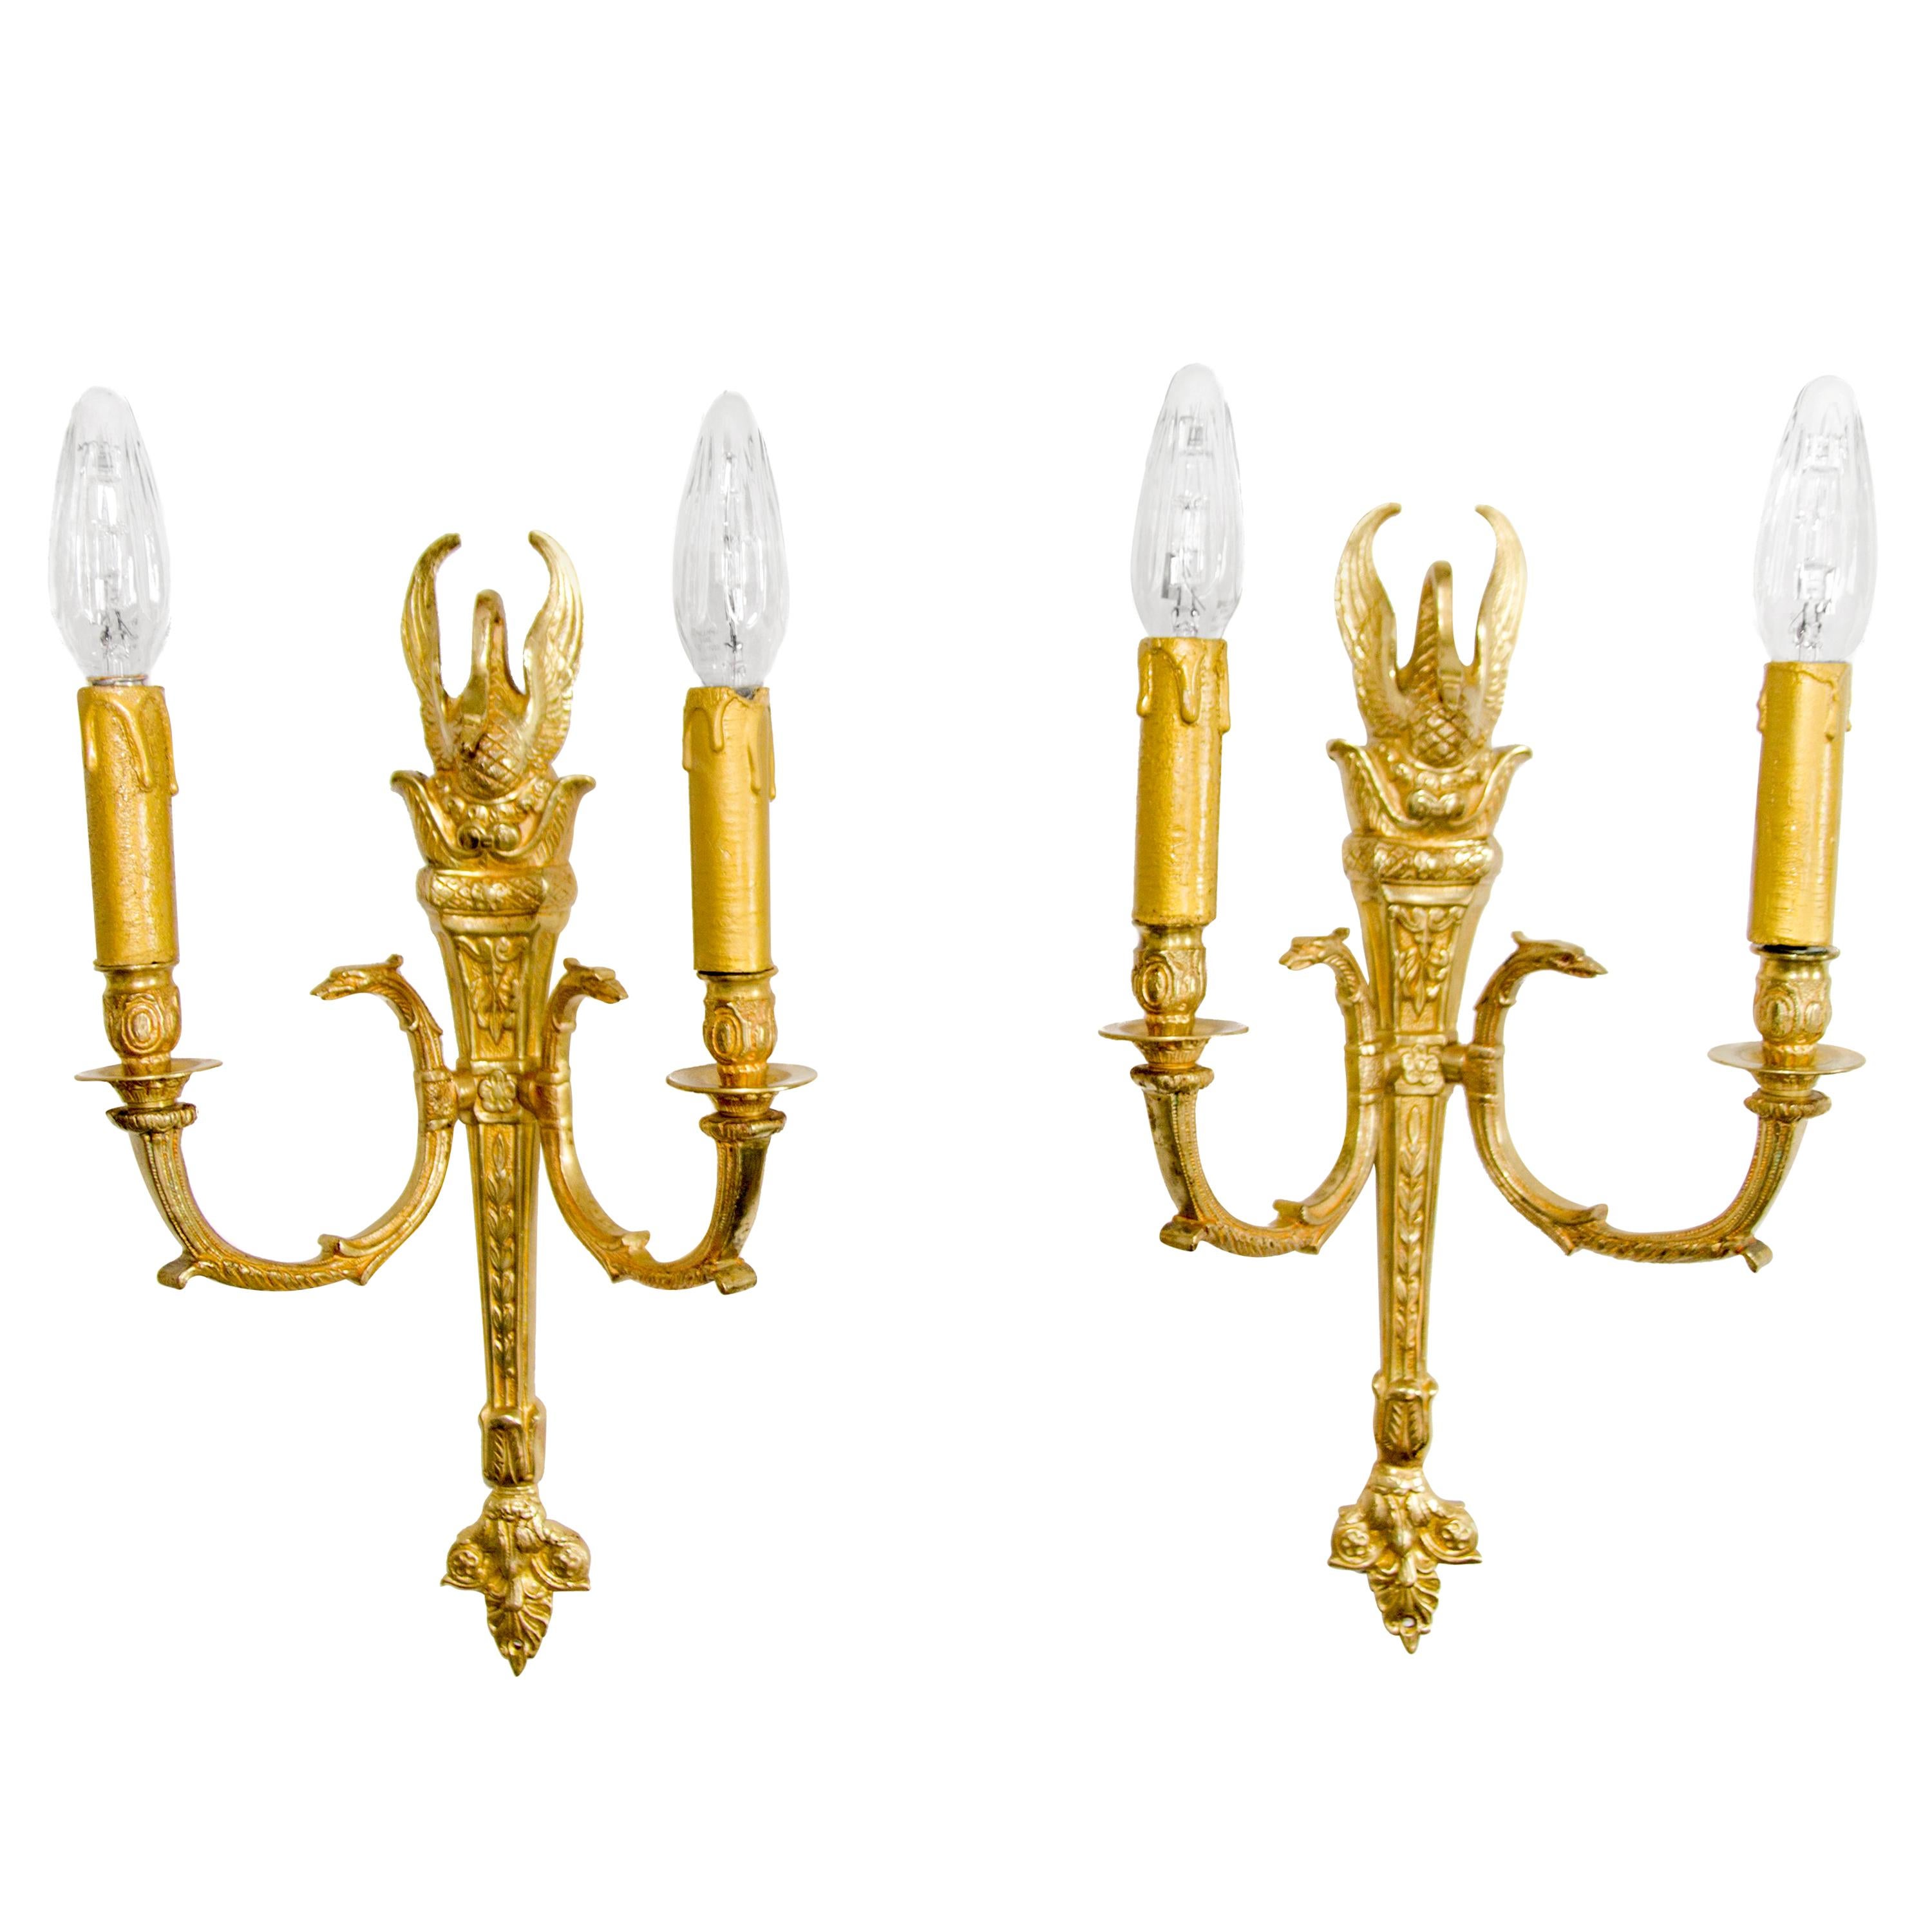 Pair of French Empire Style Gilt Bronze Two-Light Sconces